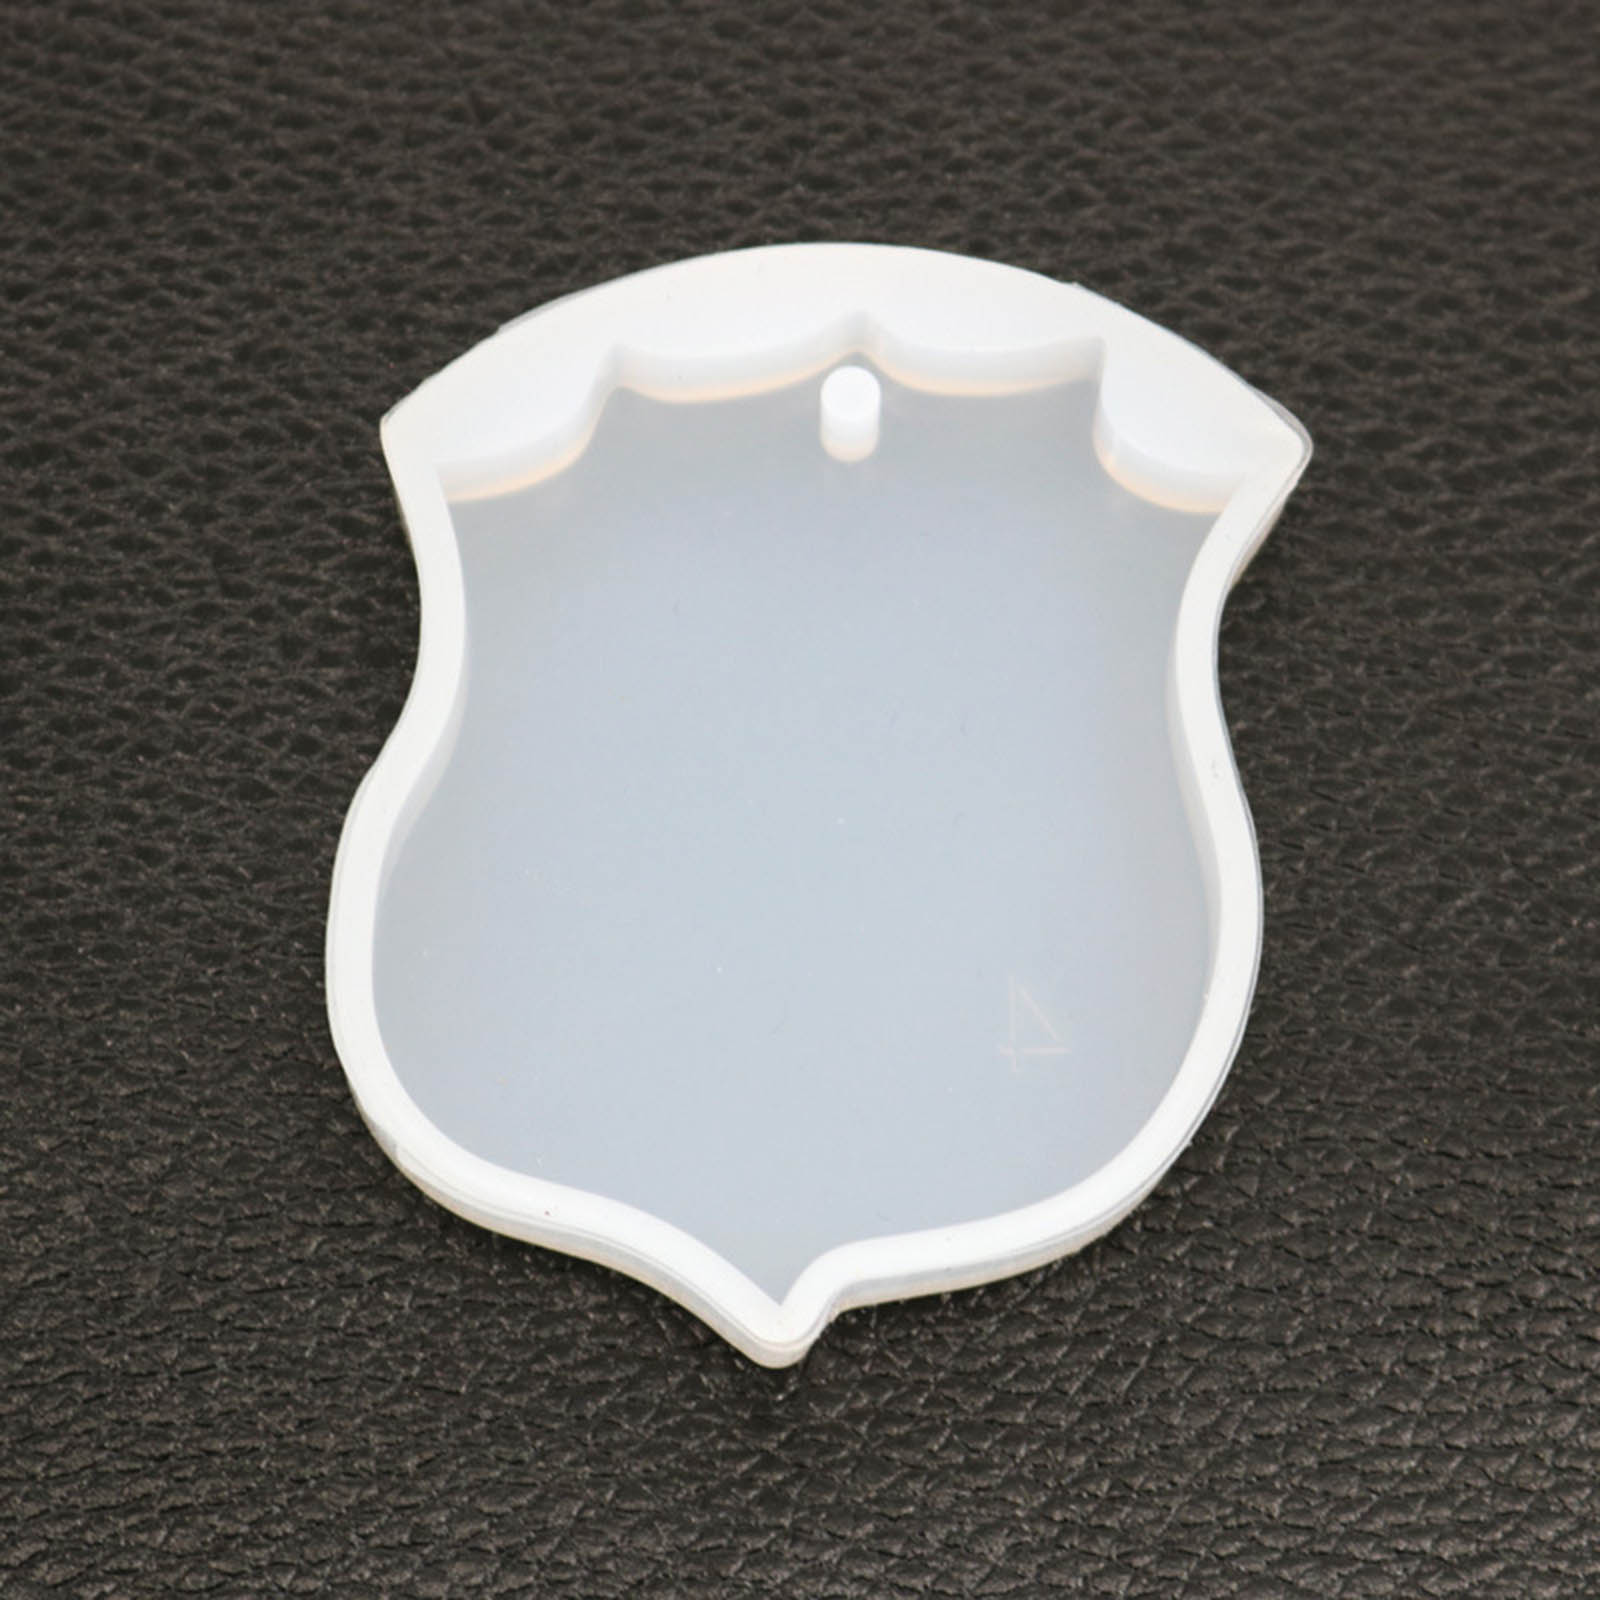 Picture of Silicone Resin Mold For Jewelry Making Pendant White 5.6cm x 4.5cm, 1 Piece